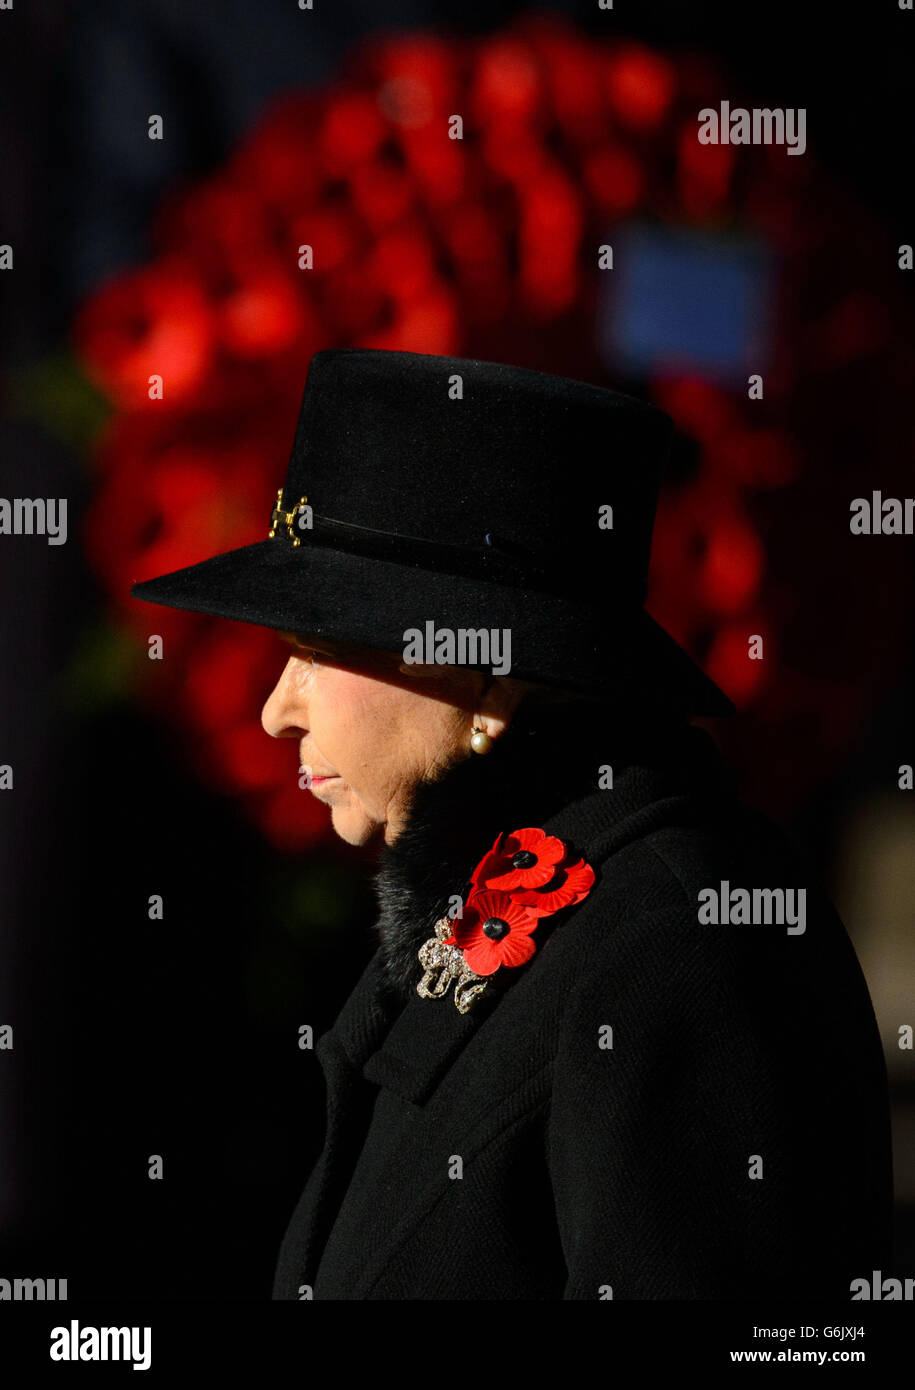 Queen Elizabeth II stands at the Cenotaph memorial in Whitehall, central London, during the annual Remembrance Sunday service held in tribute to members of the armed forces who have died in major conflicts. Stock Photo